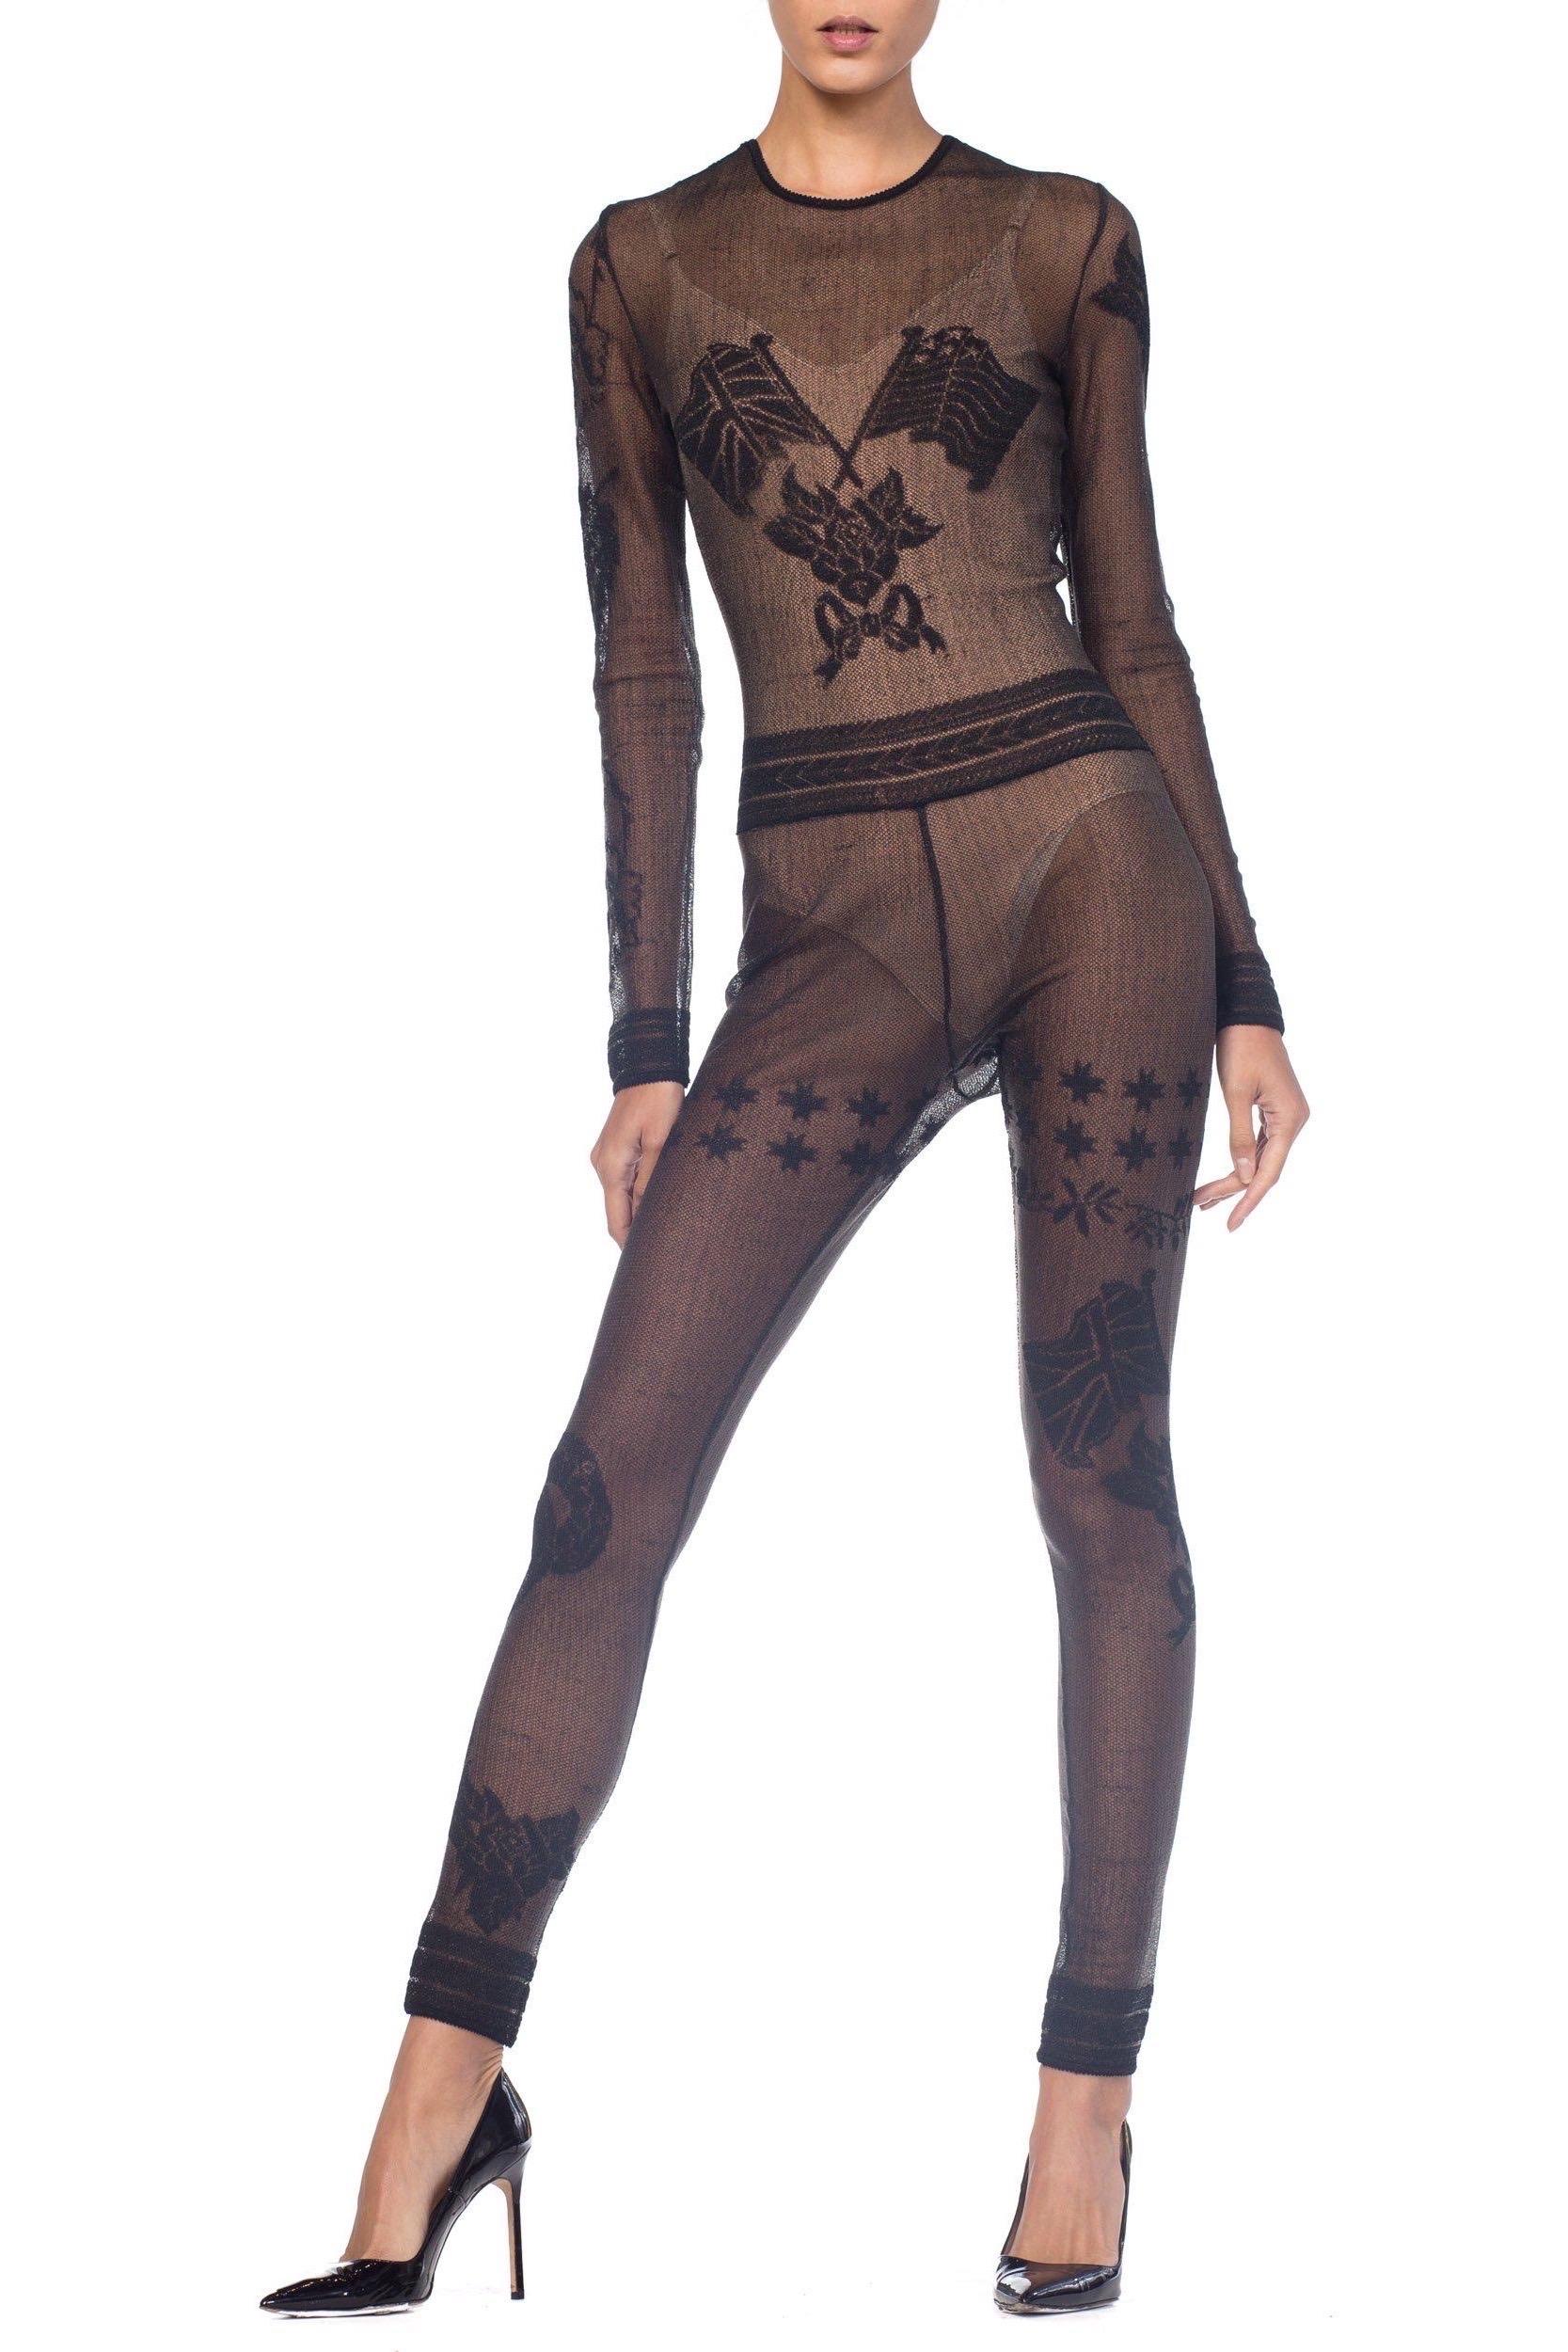 1990S JOHN GALLIANO Sheer Knit Bodysuit Jumpsuit From The Siouxsie Sphinx Colle For Sale 2